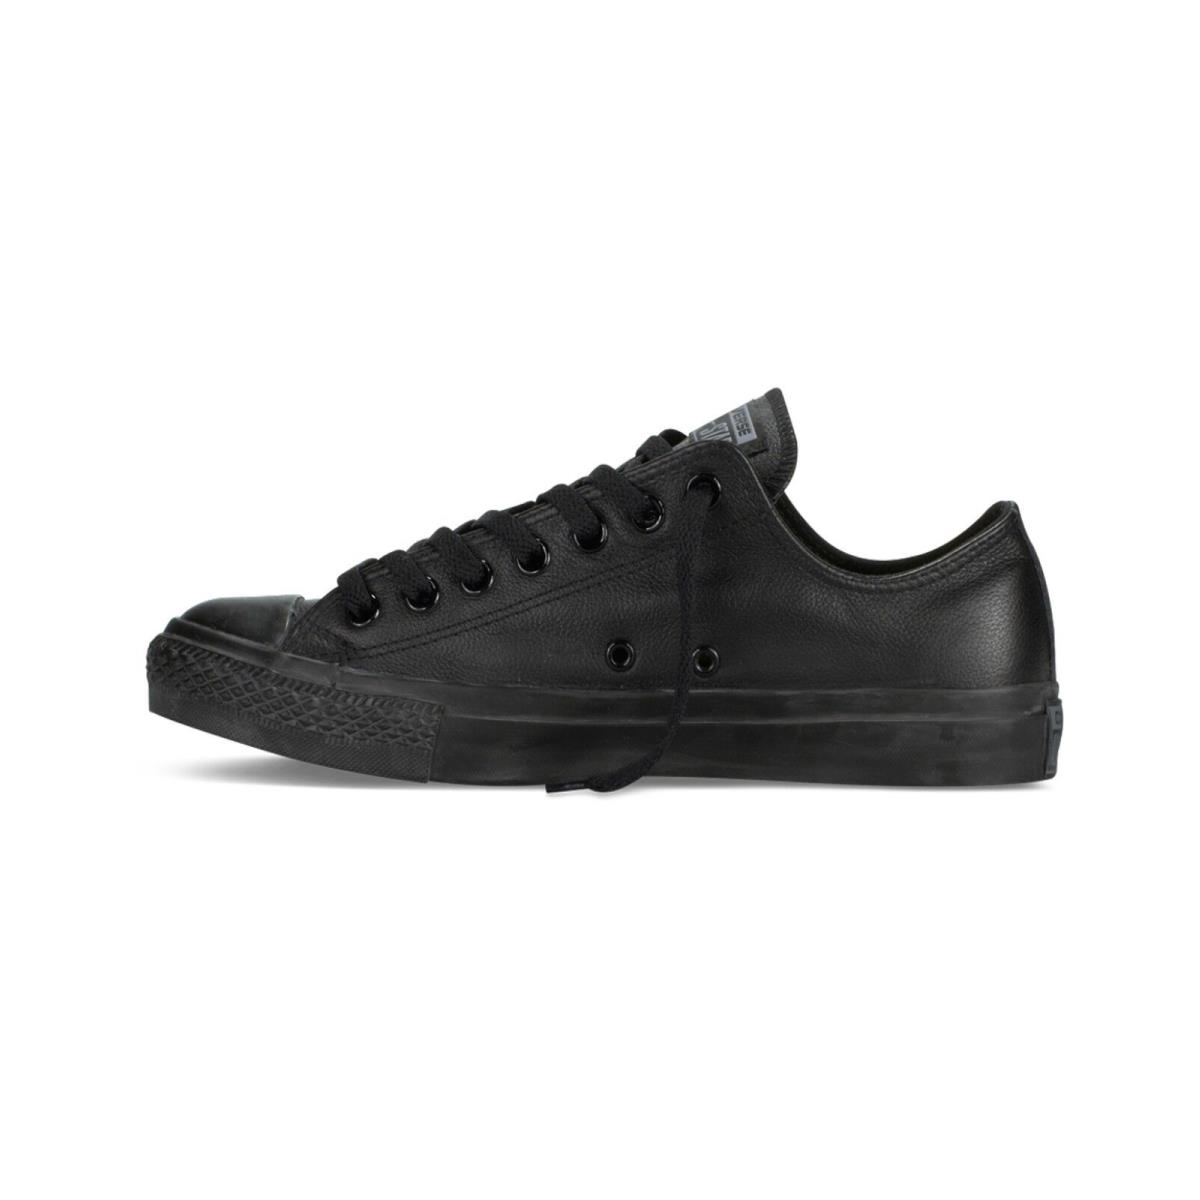 Converse Chuck Taylor Low Top Leather Mens Casual Shoes Black Nubuck